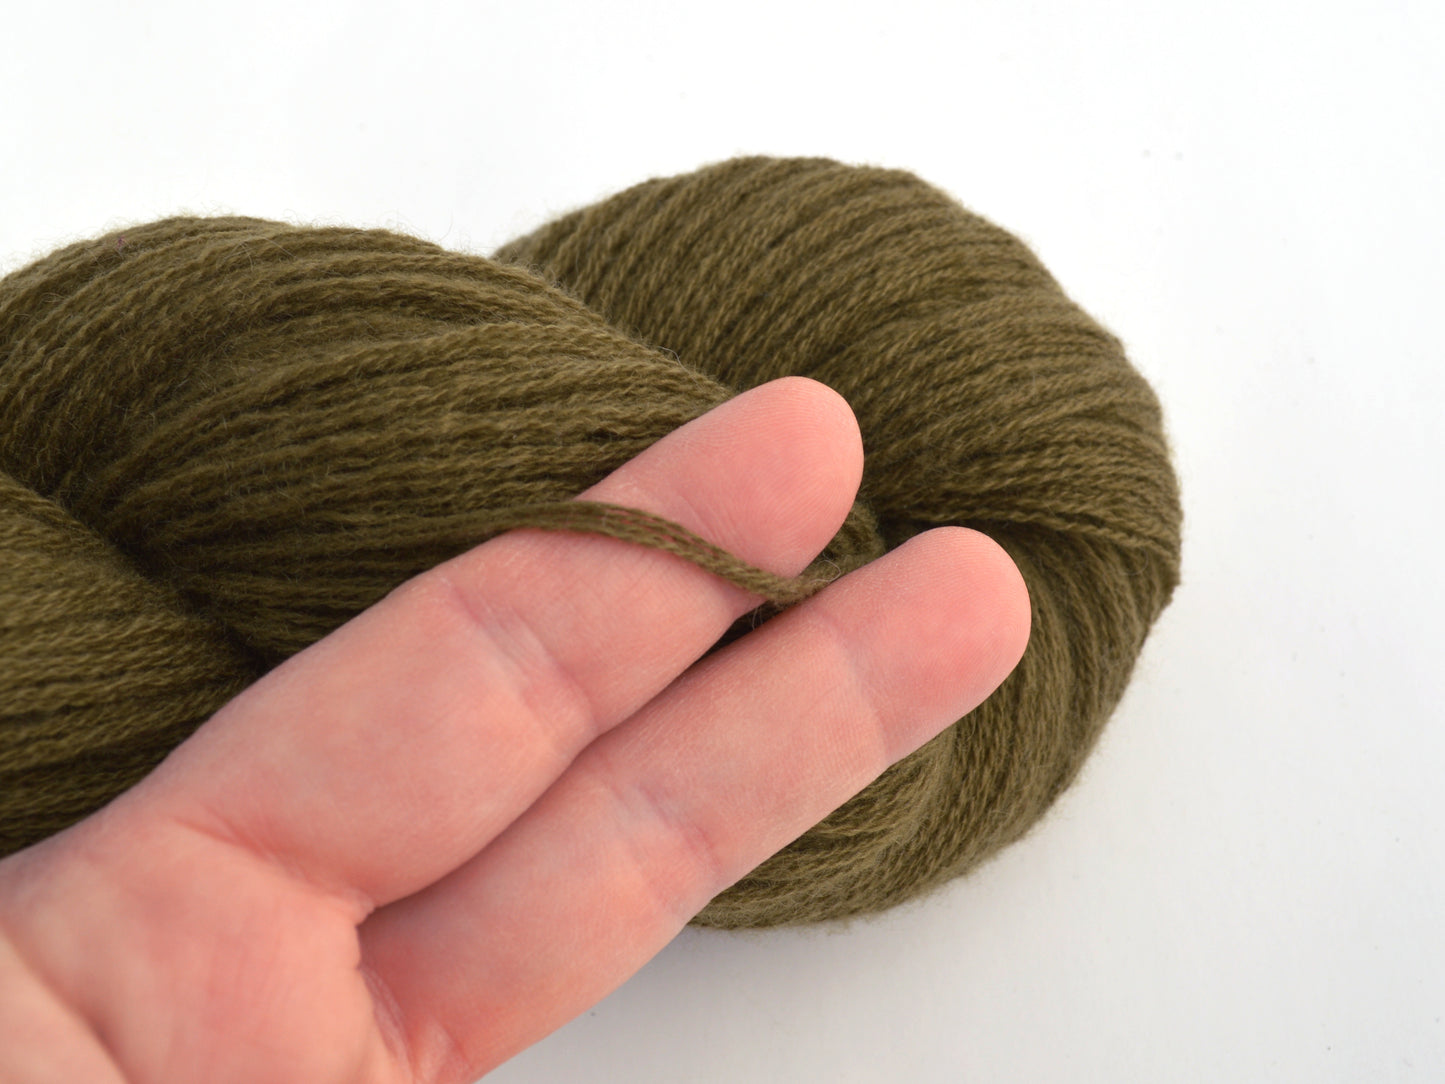 DK Weight Recycled Cashmere Yarn in Olive Green